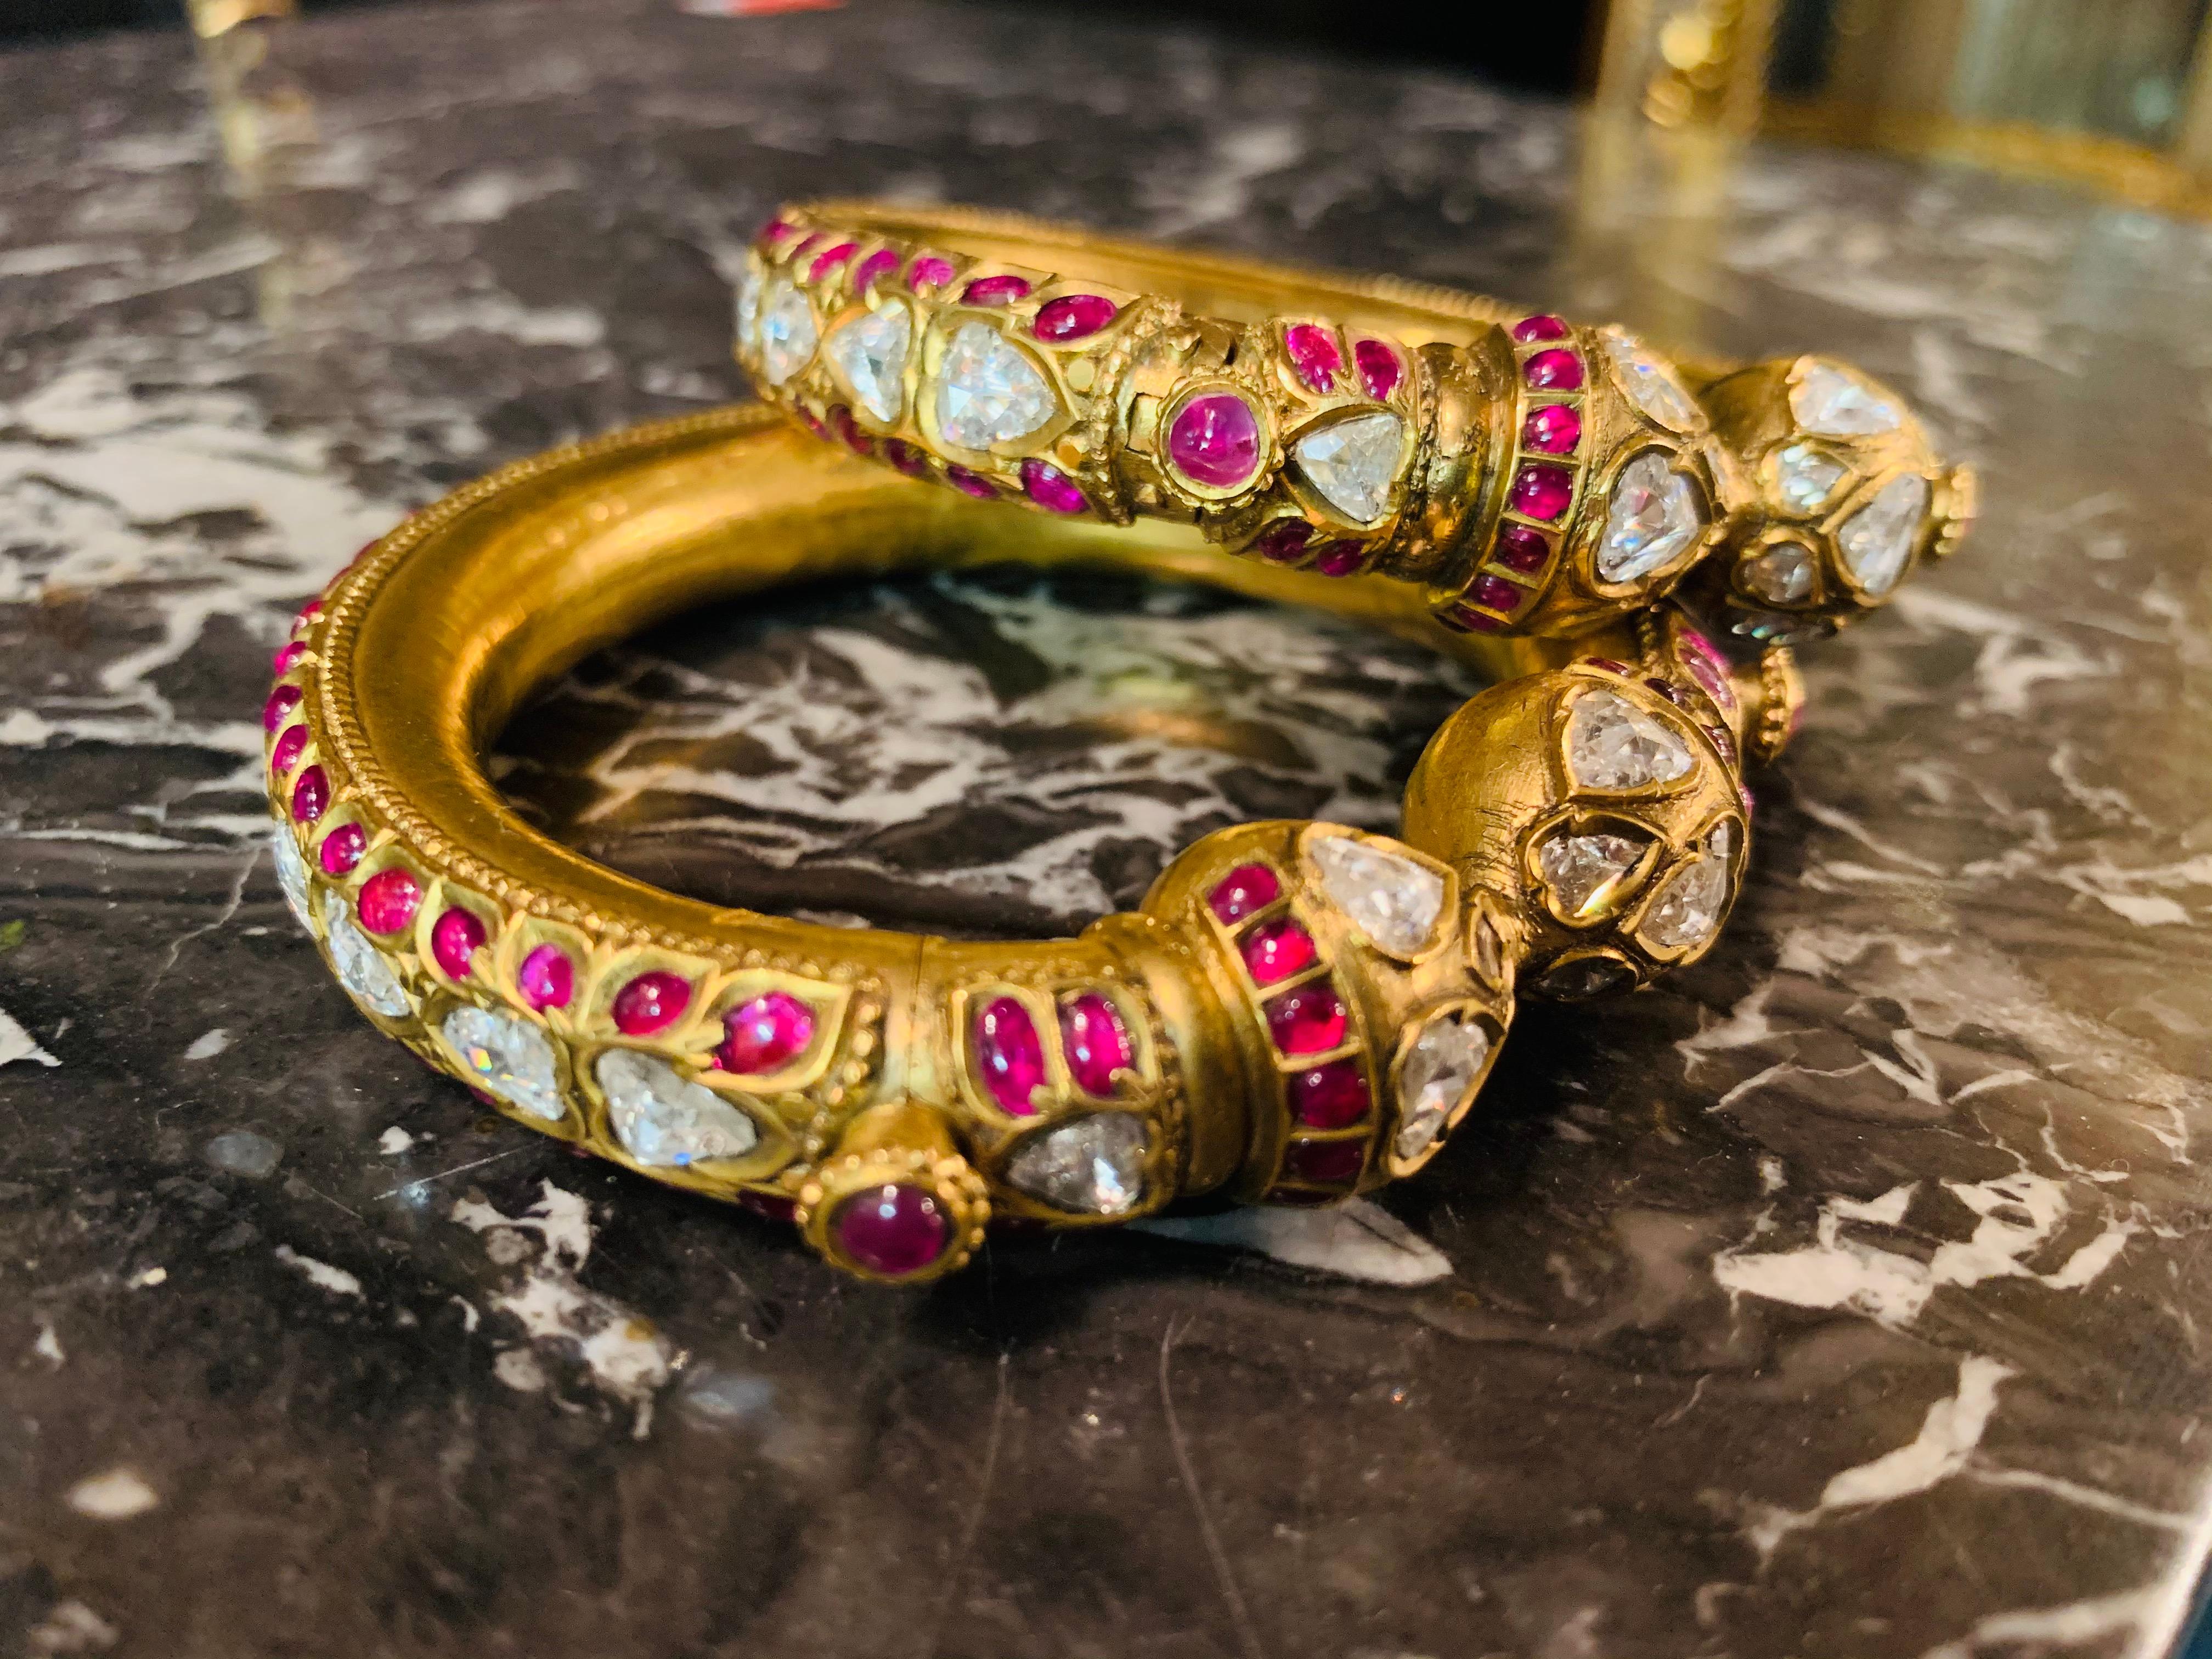 Historical pair of Indian bangles full of diamonds 22-carat gold.
The weight for both bracelets is approximately 170 grams.
The bracelets come from an estate,
There is not much we can say.
They are said to have cost more than 60,000€ at the